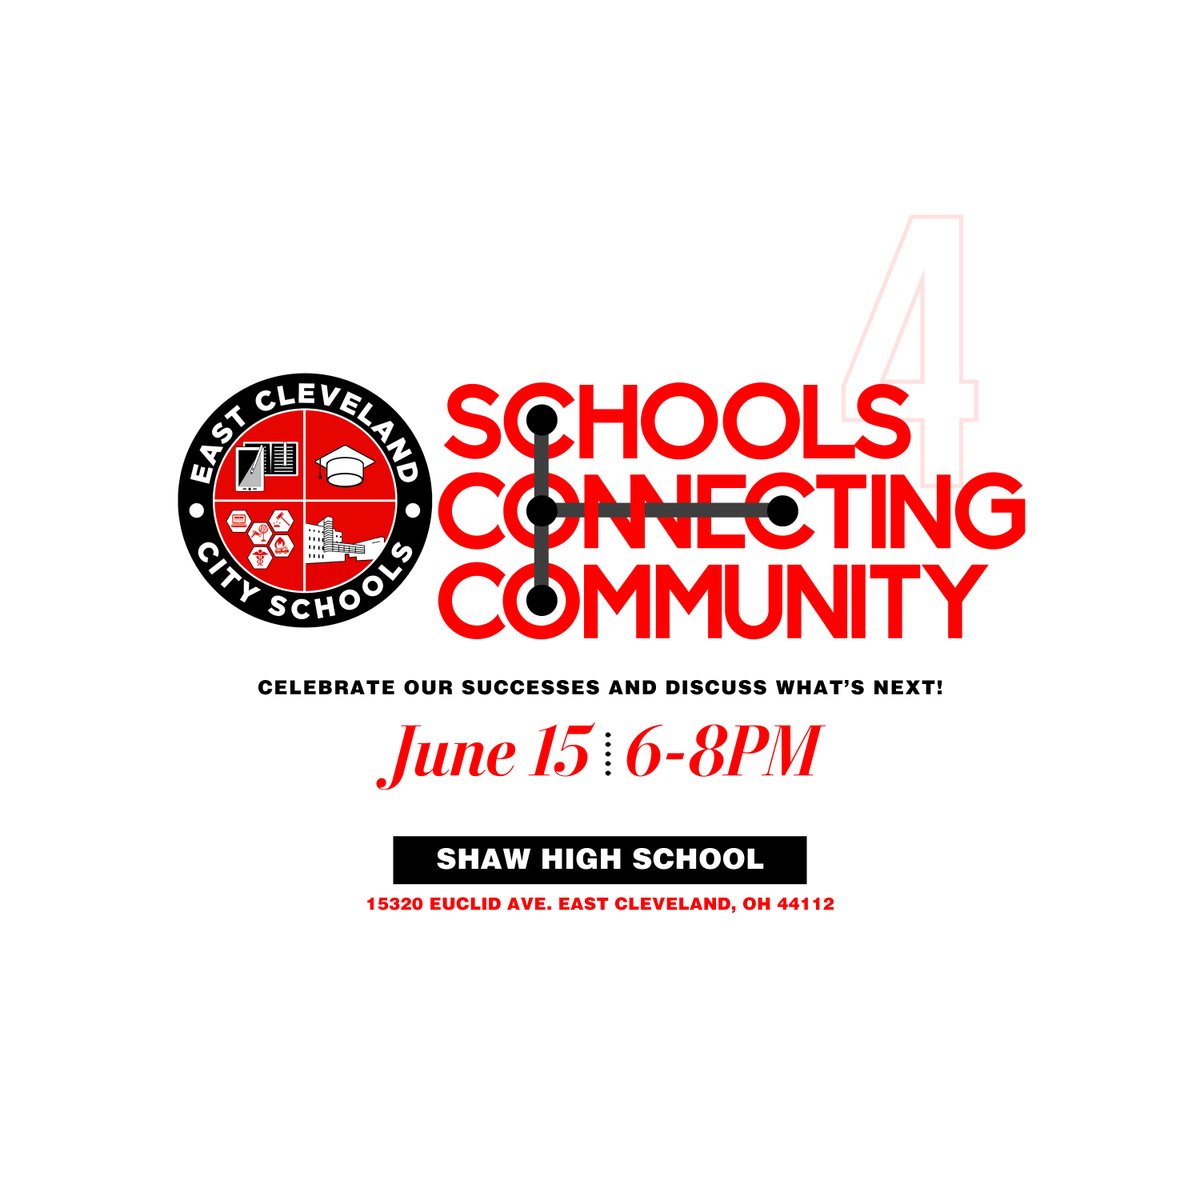 Tomorrow is the day! Please join us for our 4th quarter edition of Schools Connecting Community at Shaw High School beginning at 6pm! We hope to see you there! #FlyWithUs #schoolsconnectingcommunity